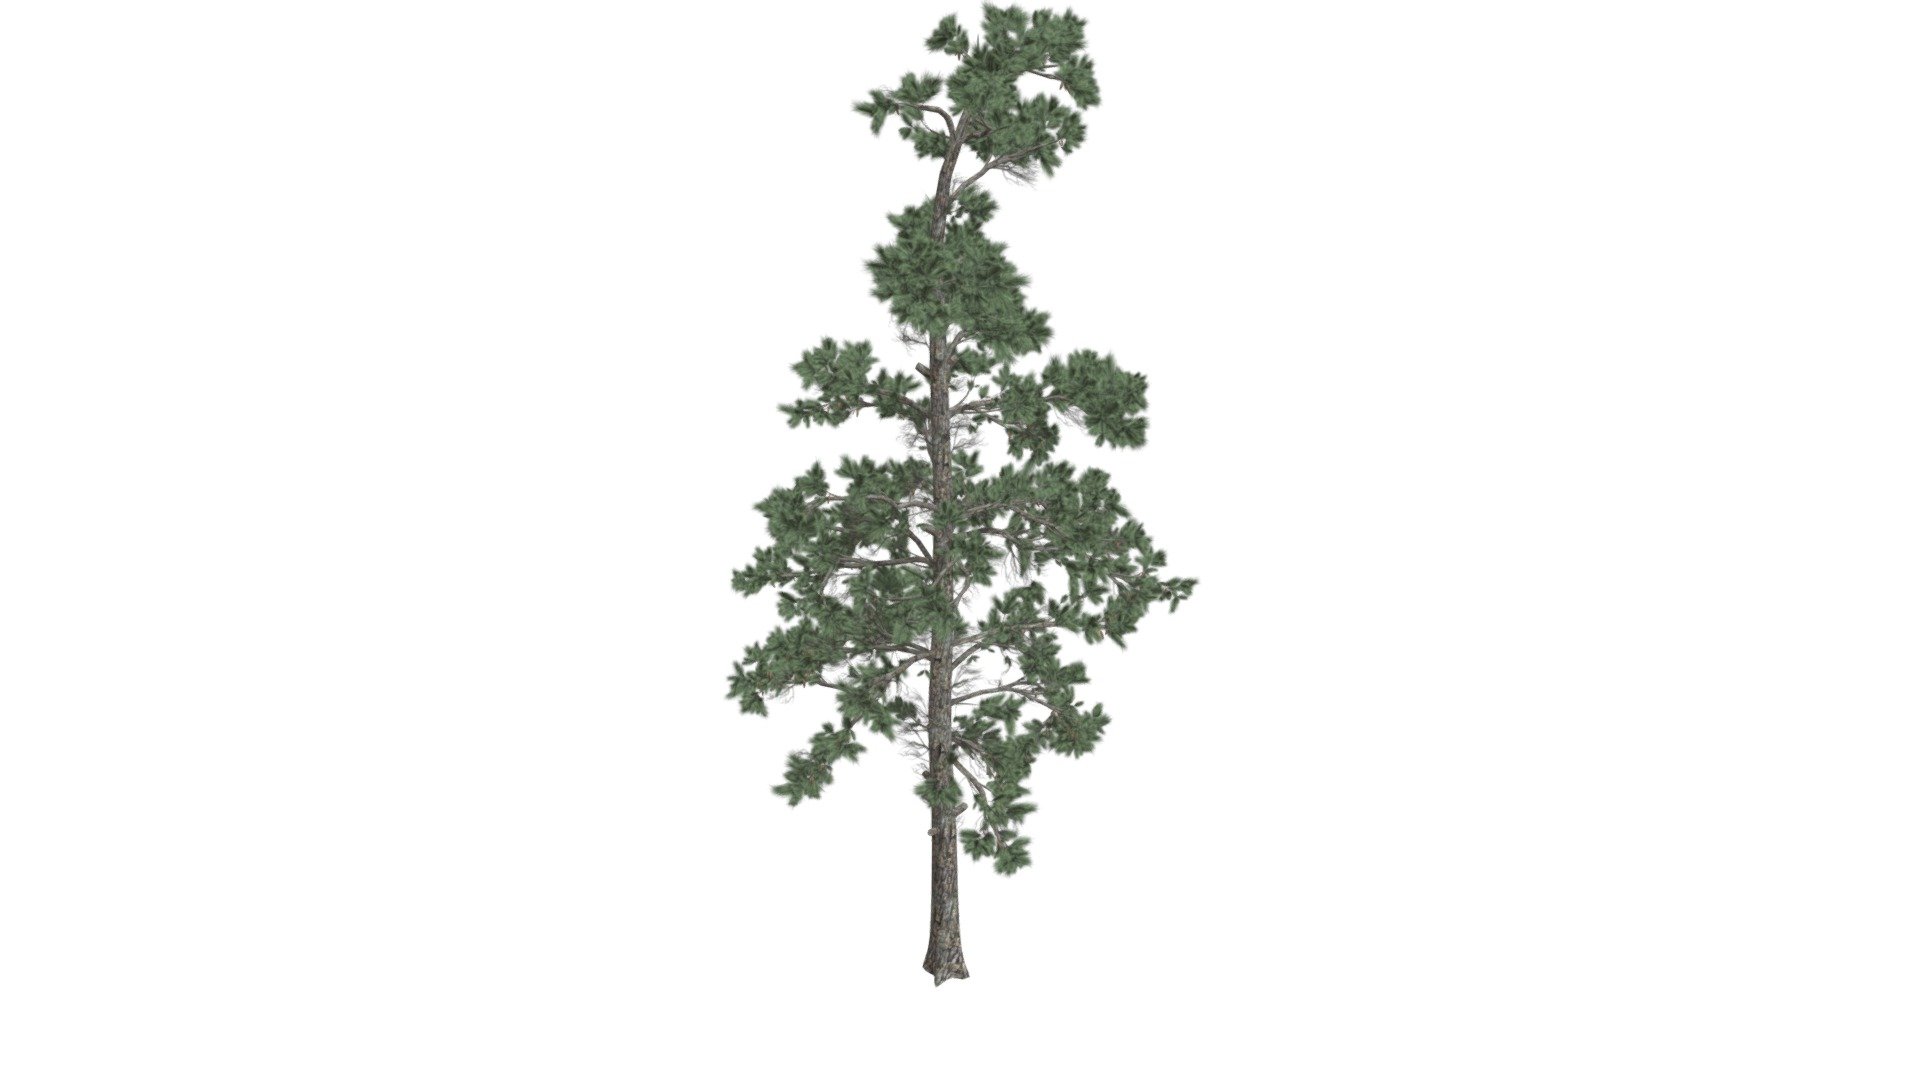 This 3D model of the Eastern White Pine Tree is a highly detailed and photorealistic option suitable for architectural, landscaping, and video game projects. The model is designed with carefully crafted textures that mimic the natural beauty of a real Eastern White Pine Tree. Its versatility allows it to bring a touch of realism to any project, whether it's a small architectural rendering or a large-scale landscape design. Additionally, the model is optimized for performance and features efficient UV mapping. This photorealistic 3D model is the perfect solution for architects, landscapers, and game developers who want to enhance the visual experience of their project with a highly detailed, photorealistic Eastern White Pine Tree 3d model